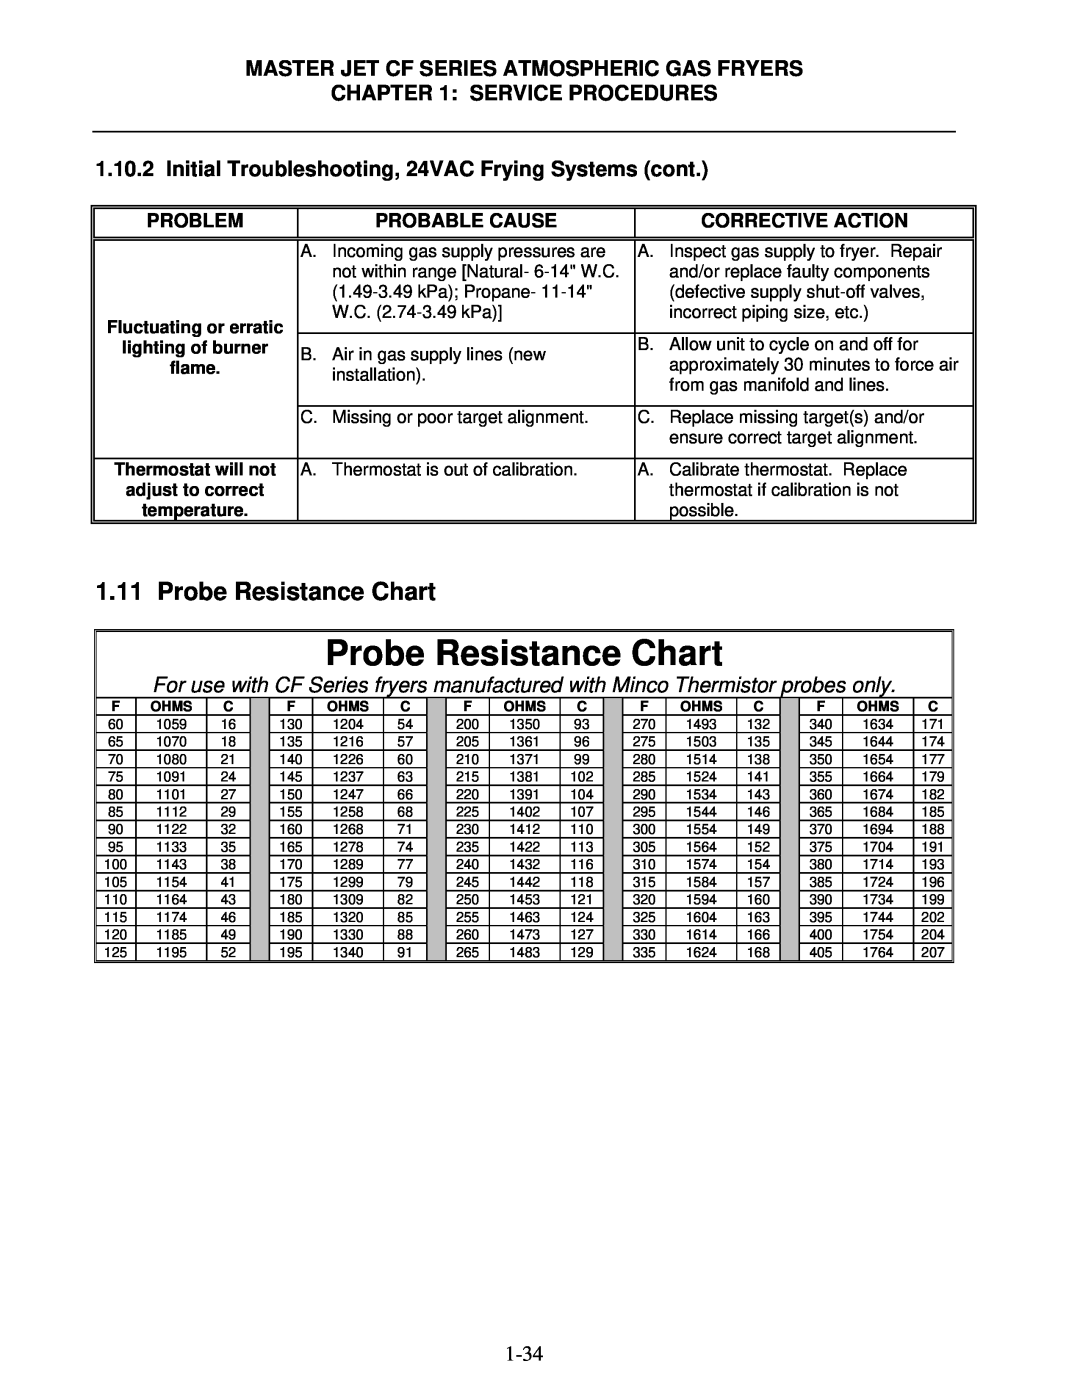 Frymaster MJCFEC, FMCFEC Probe Resistance Chart, Initial Troubleshooting, 24VAC Frying Systems cont, Service Procedures 